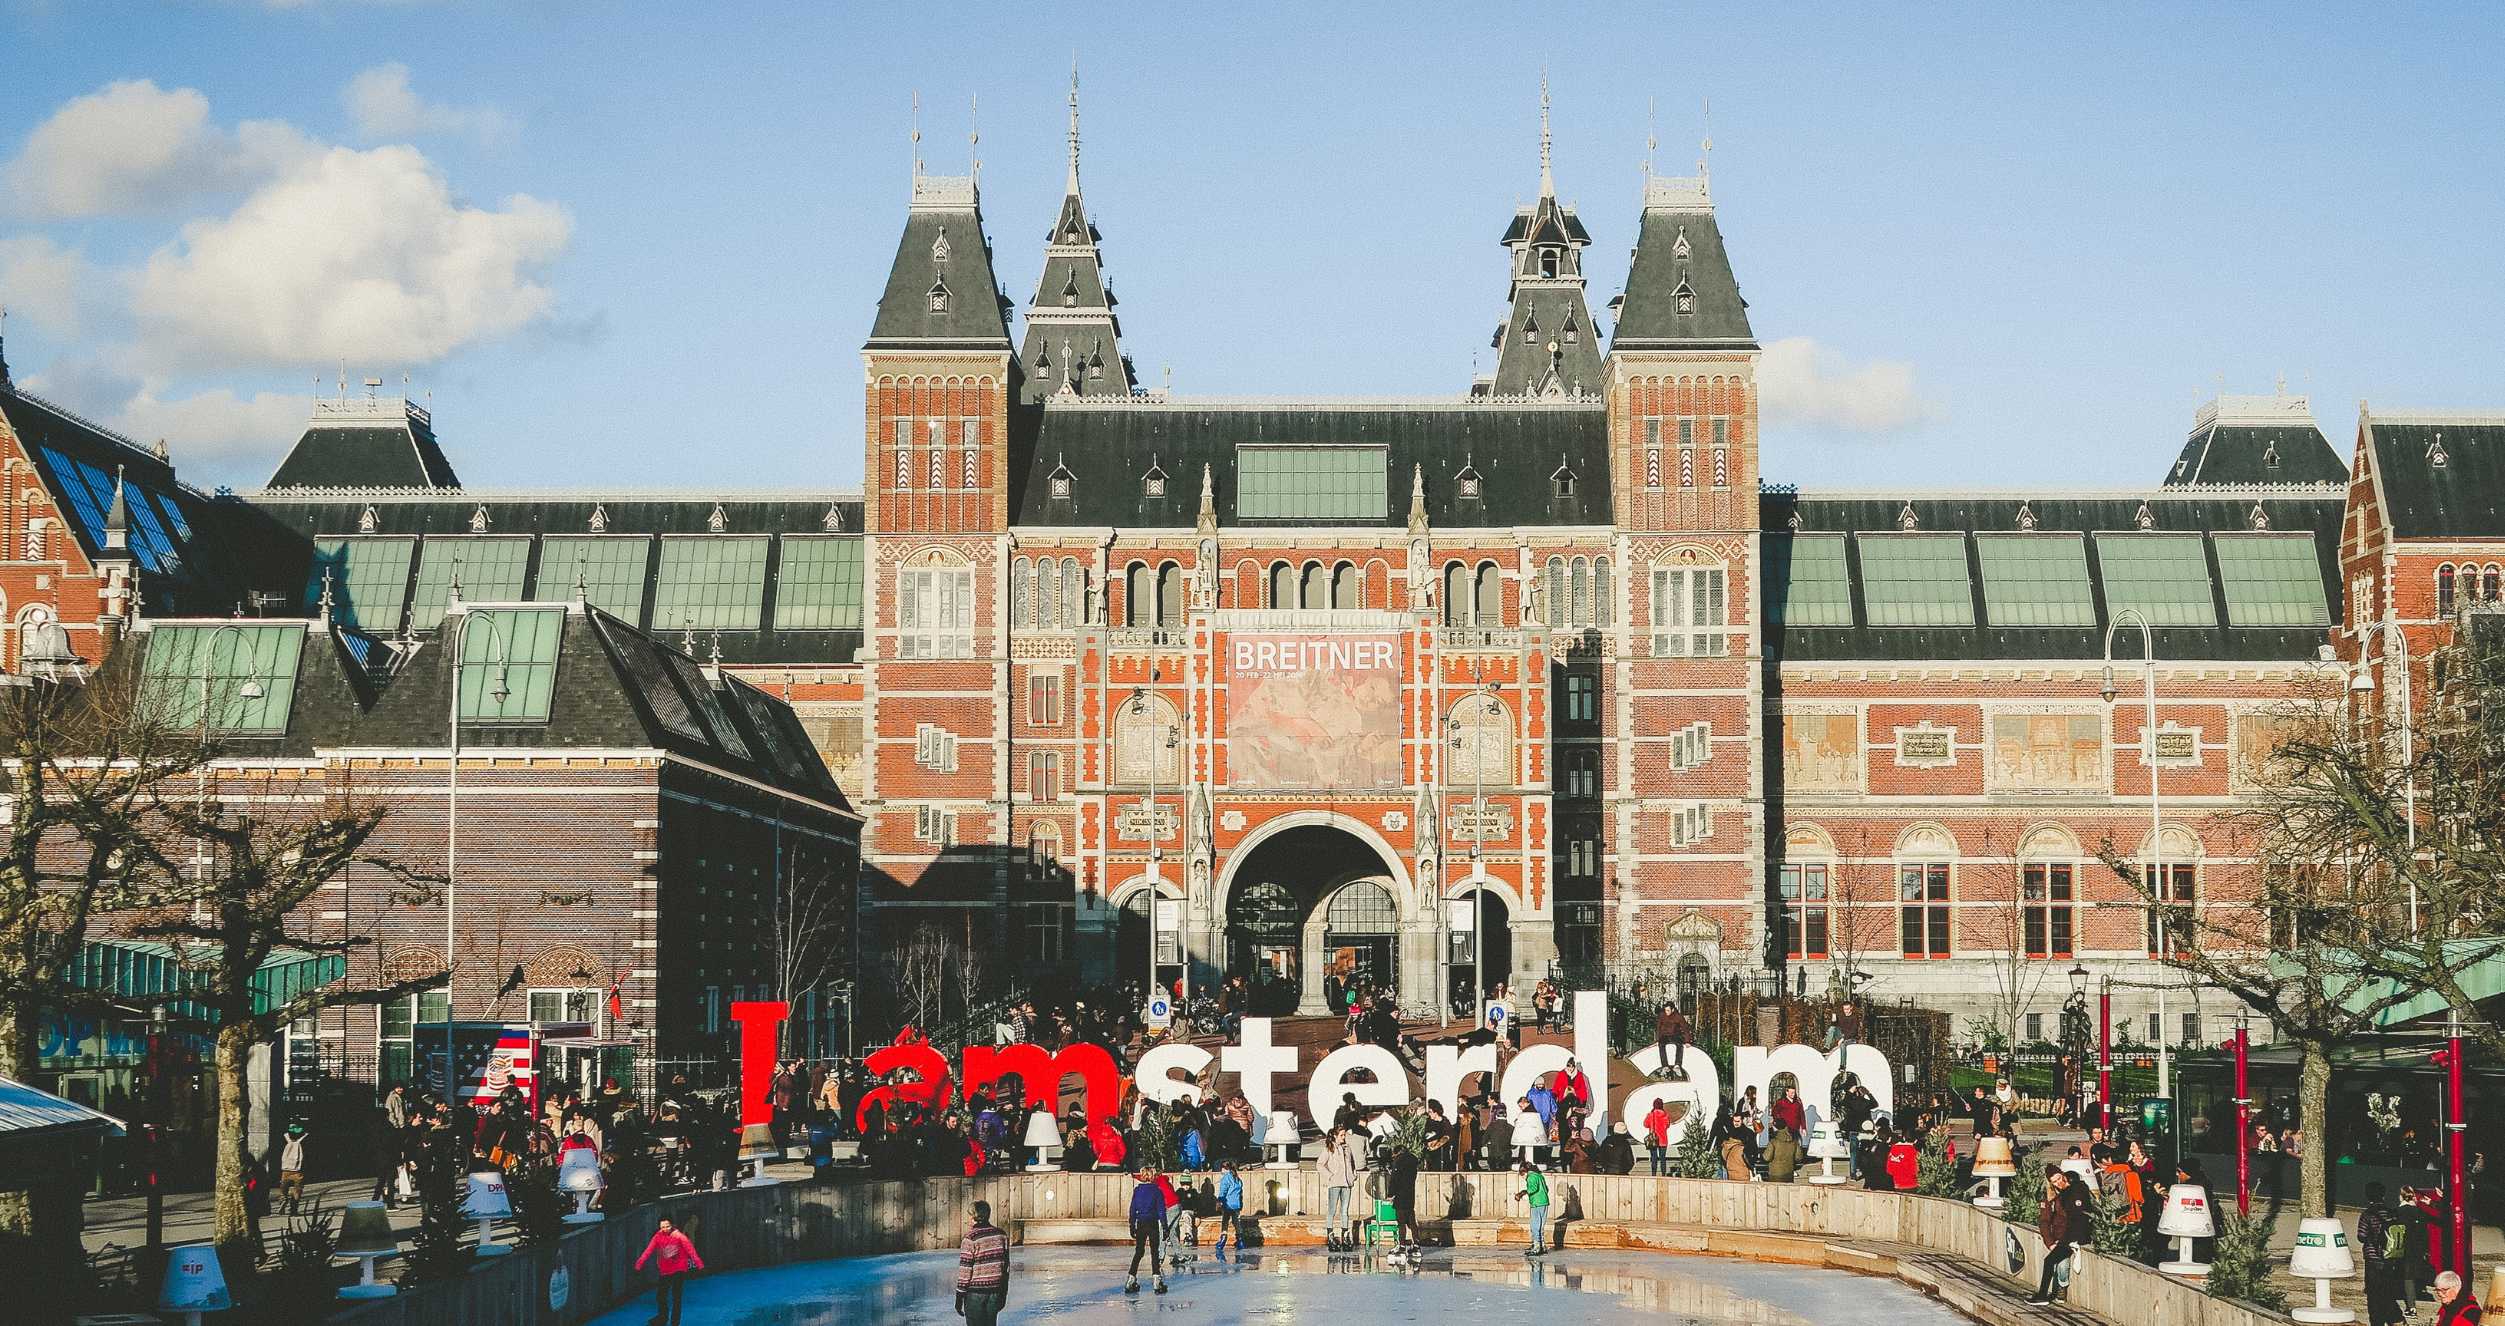 The "I AM AMSTERDAM" sign